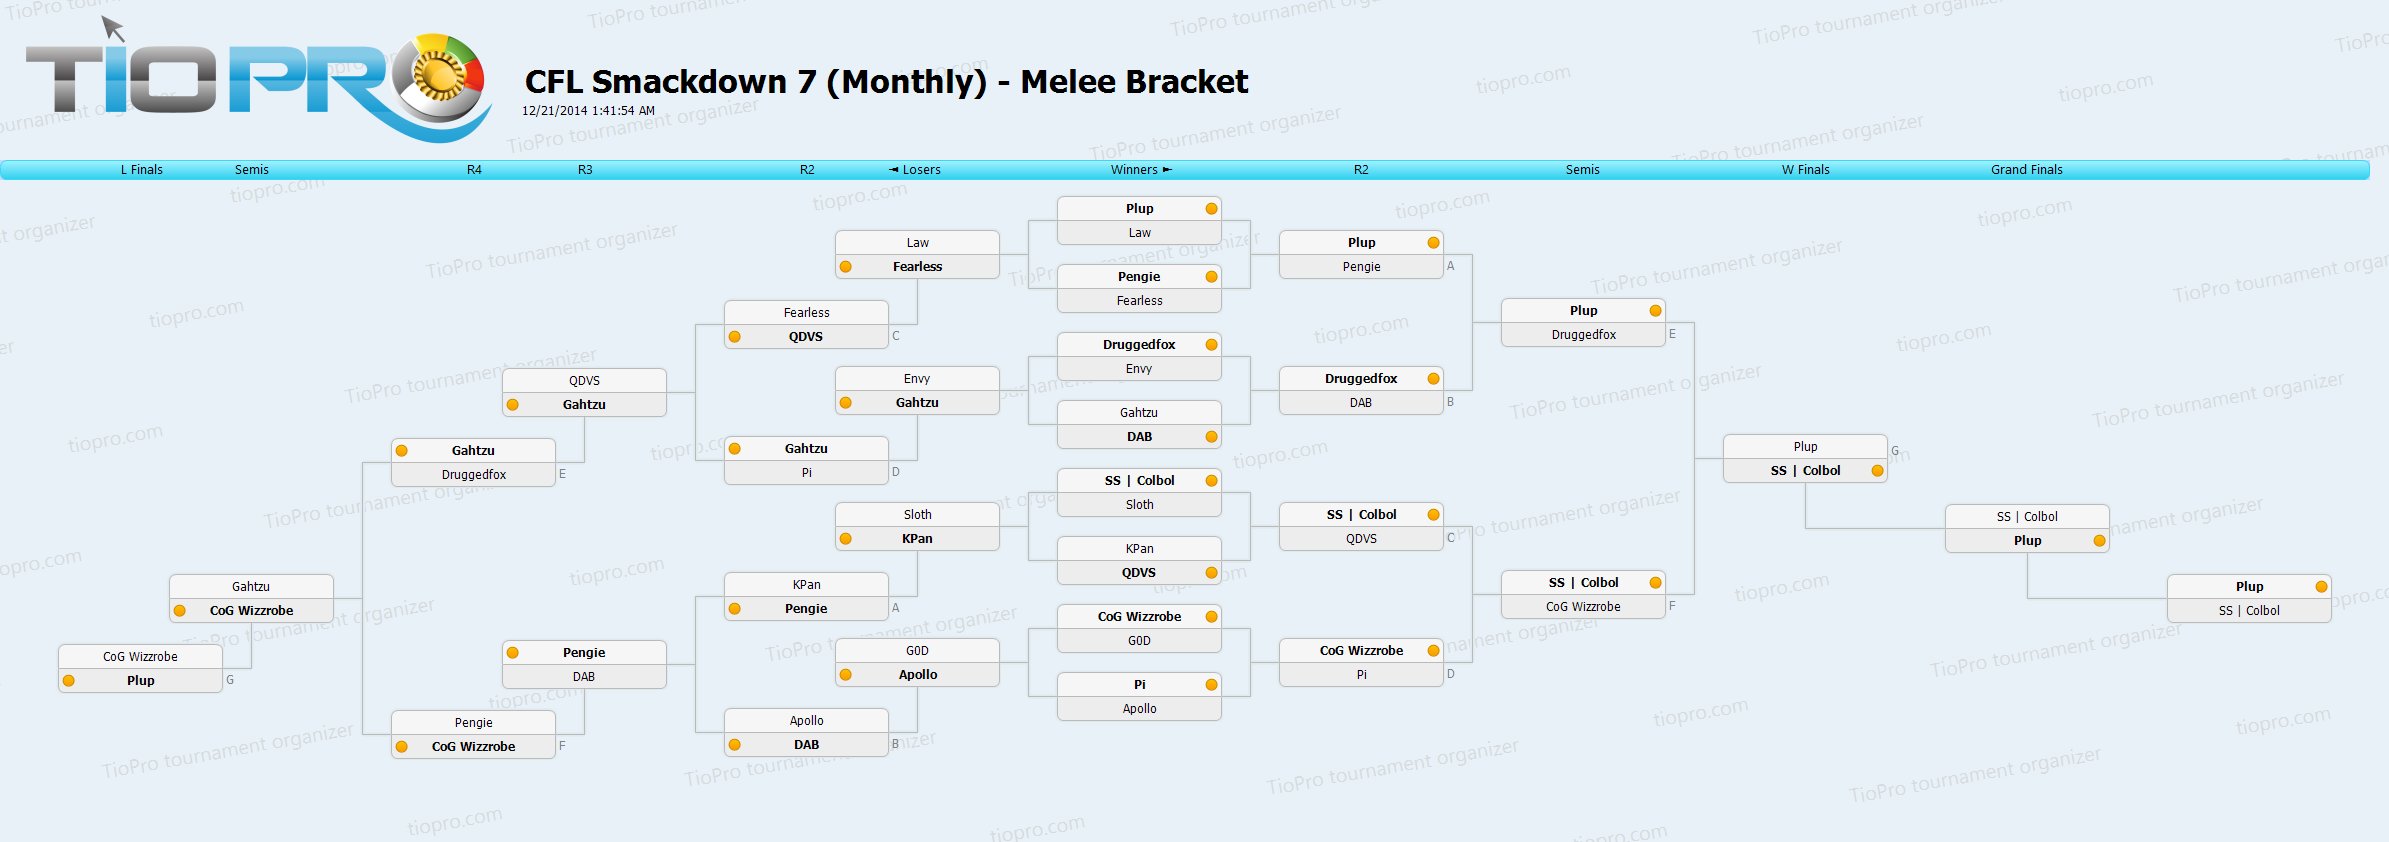 CFL Smackdown Monthly 7 12/20/14: Melee Singles Top 16